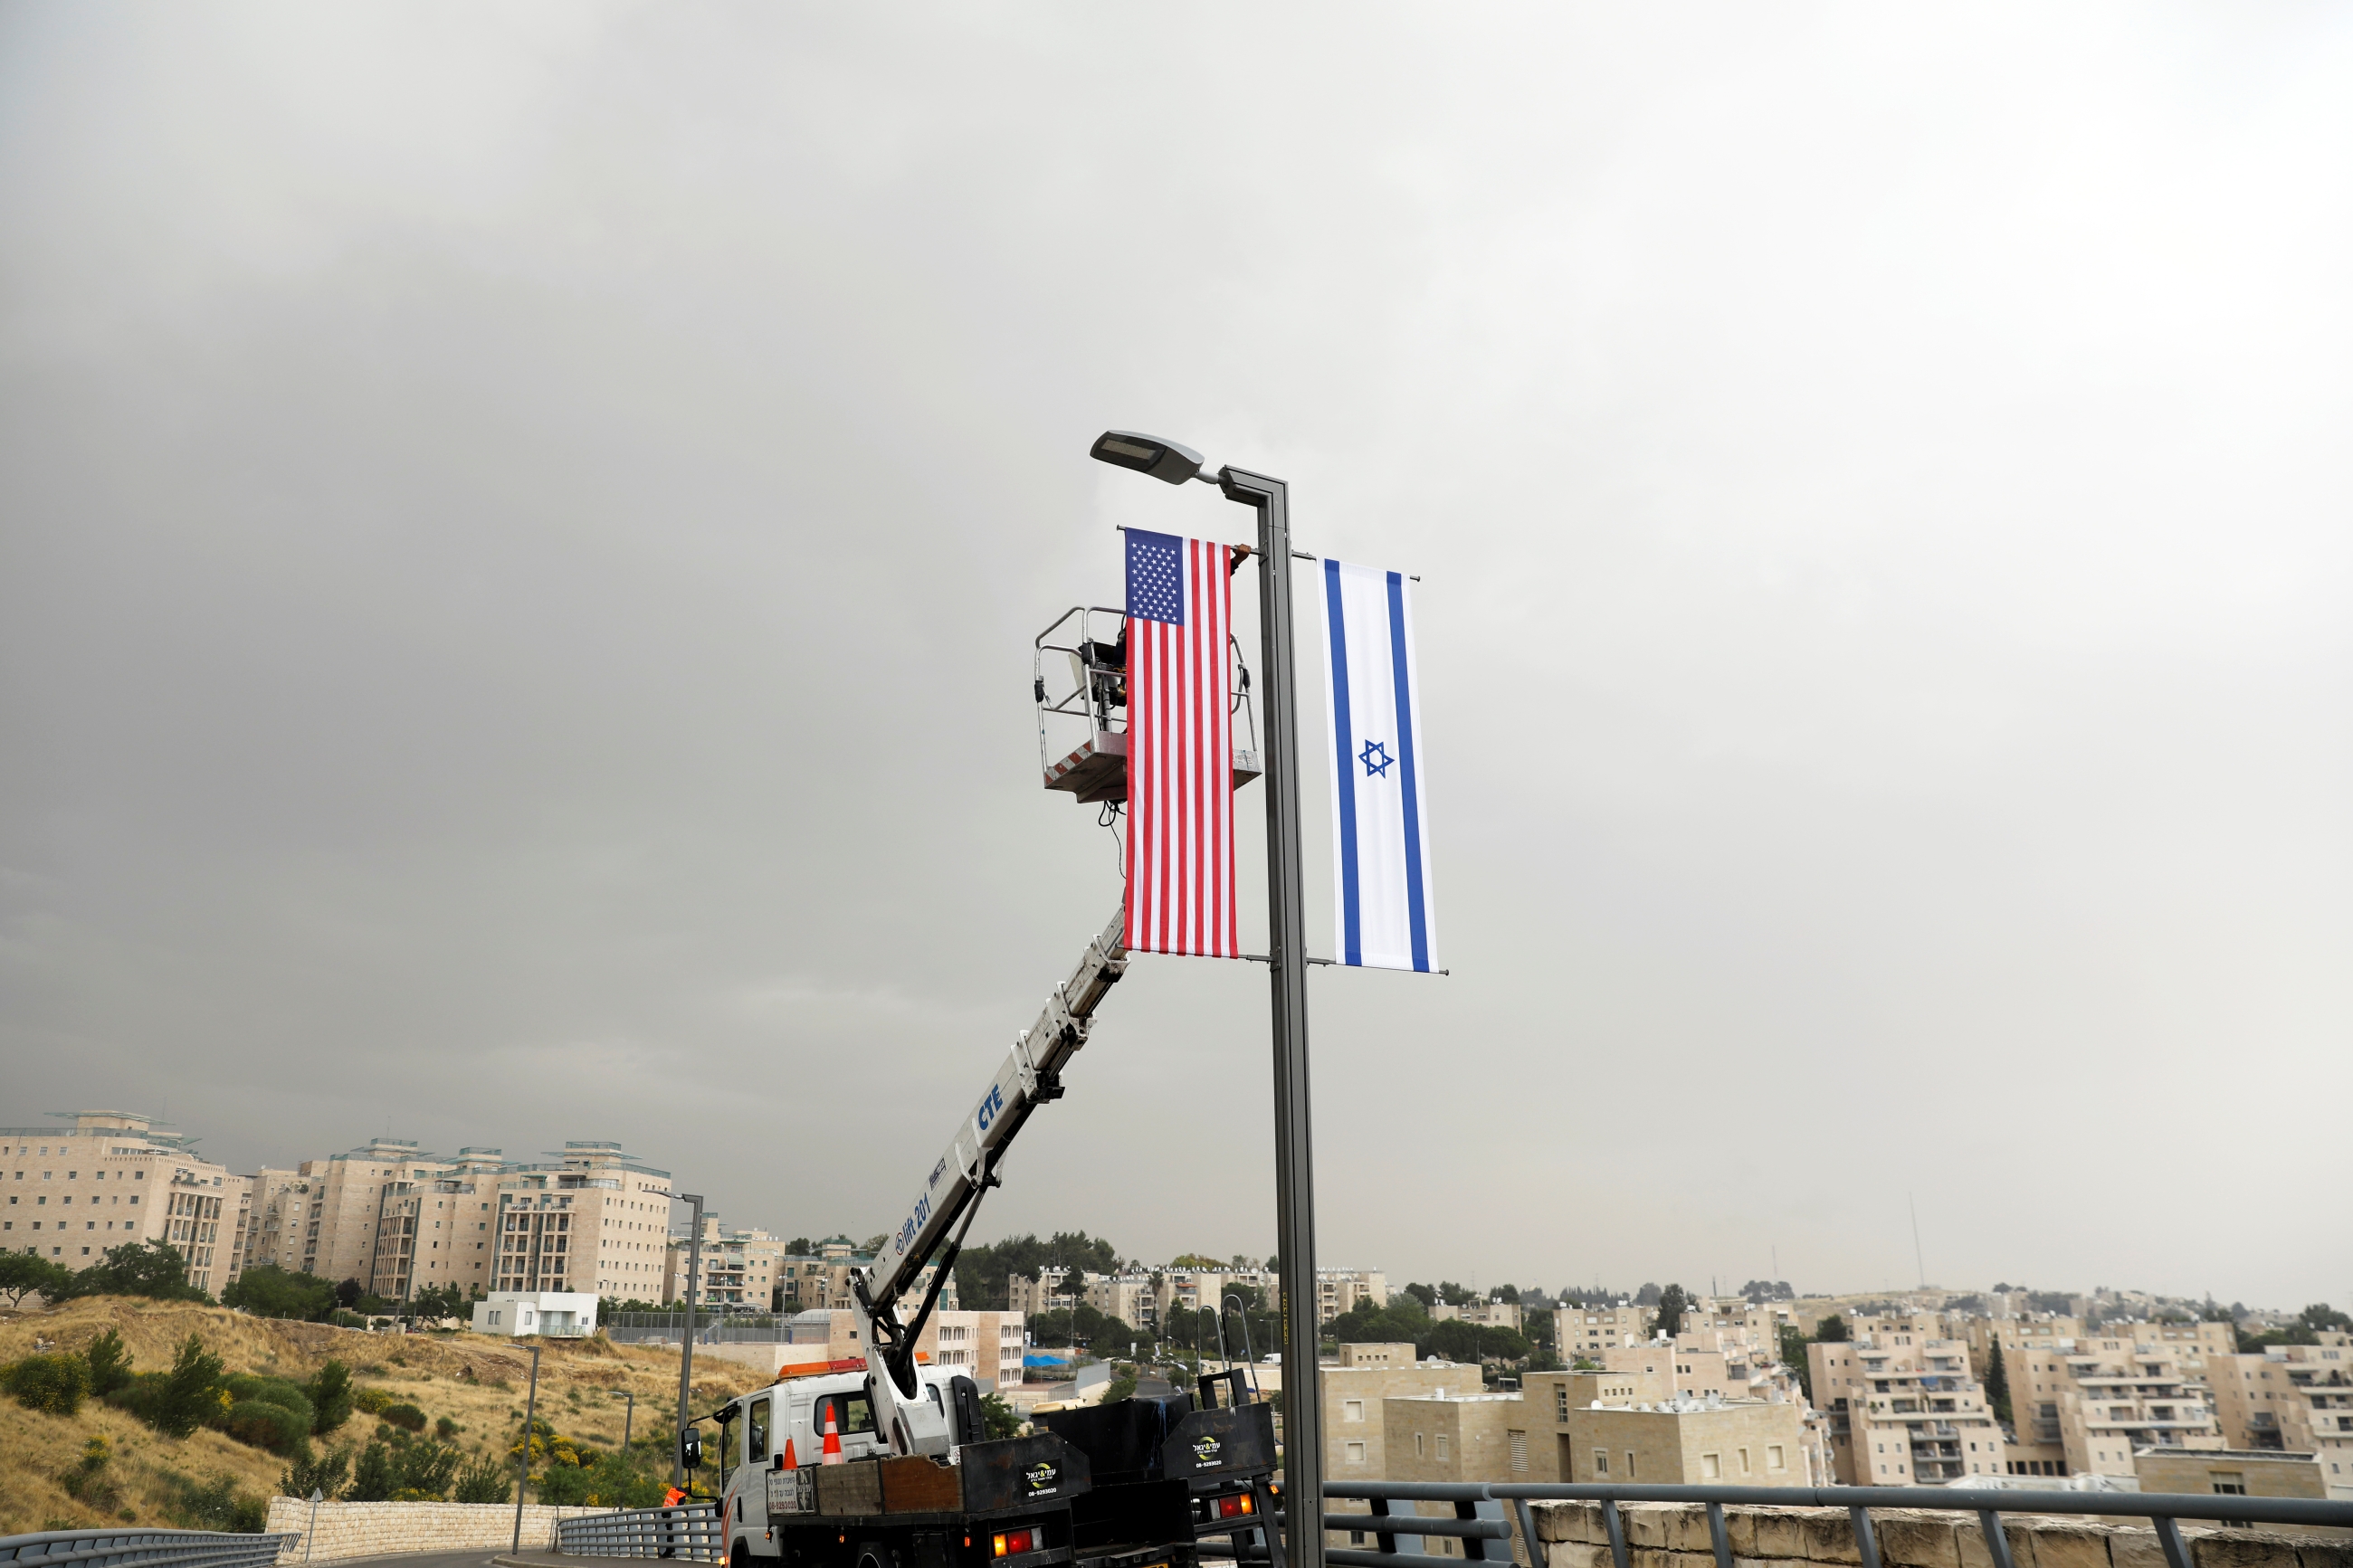 A worker on a crane hangs a US flag next to an Israeli flag, next to the entrance to the US consulate in Jerusalem on 7 May 2018 (Reuters)